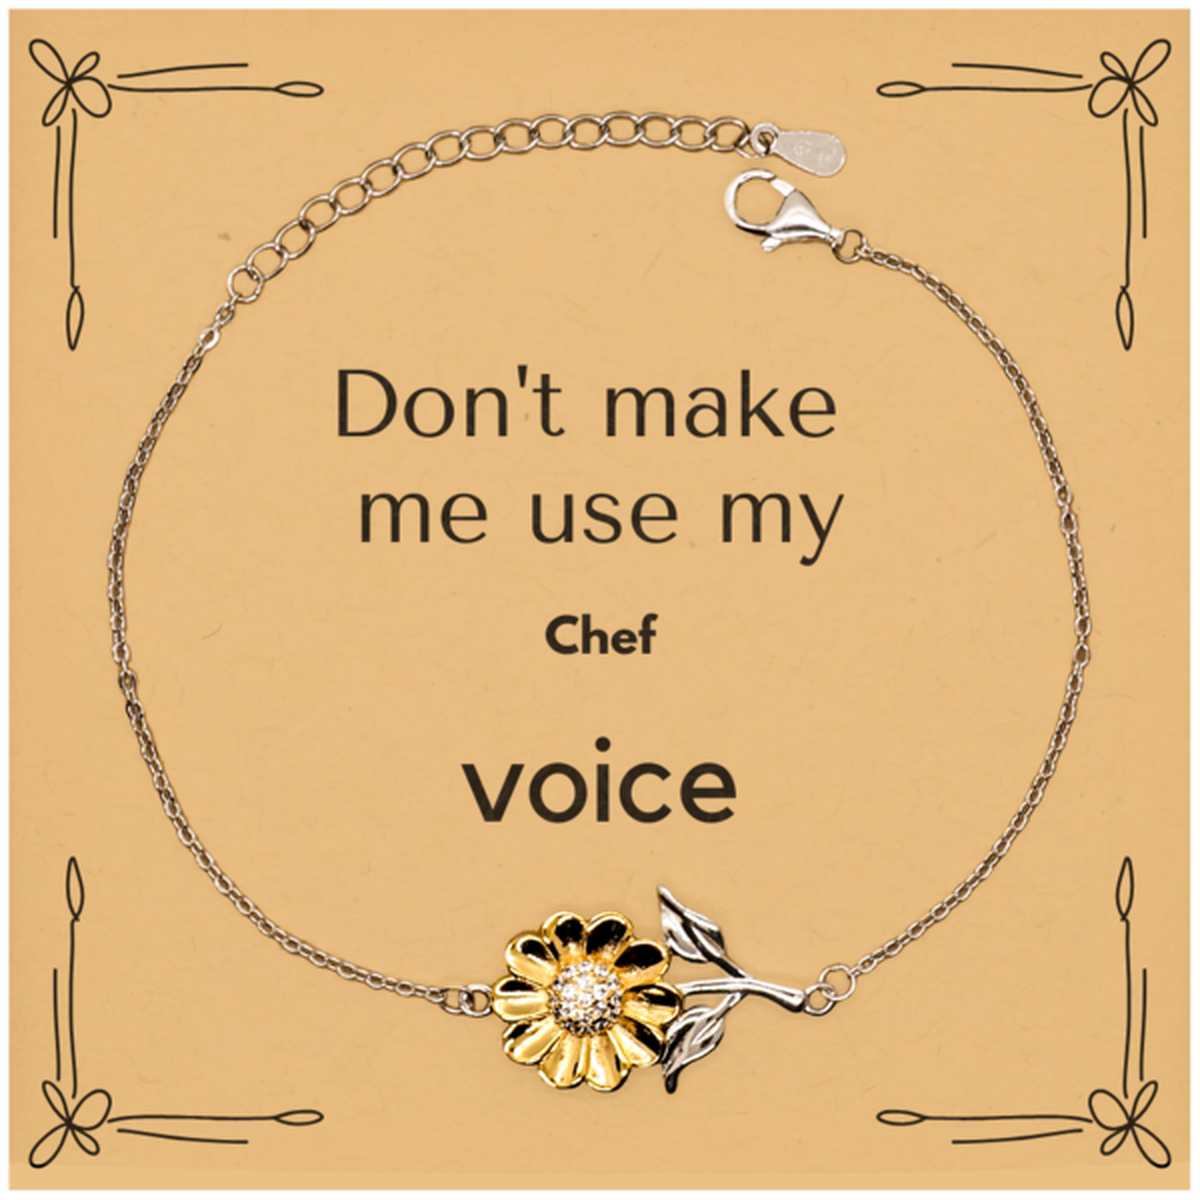 Don't make me use my Chef voice, Sarcasm Chef Card Gifts, Christmas Chef Sunflower Bracelet Birthday Unique Gifts For Chef Coworkers, Men, Women, Colleague, Friends